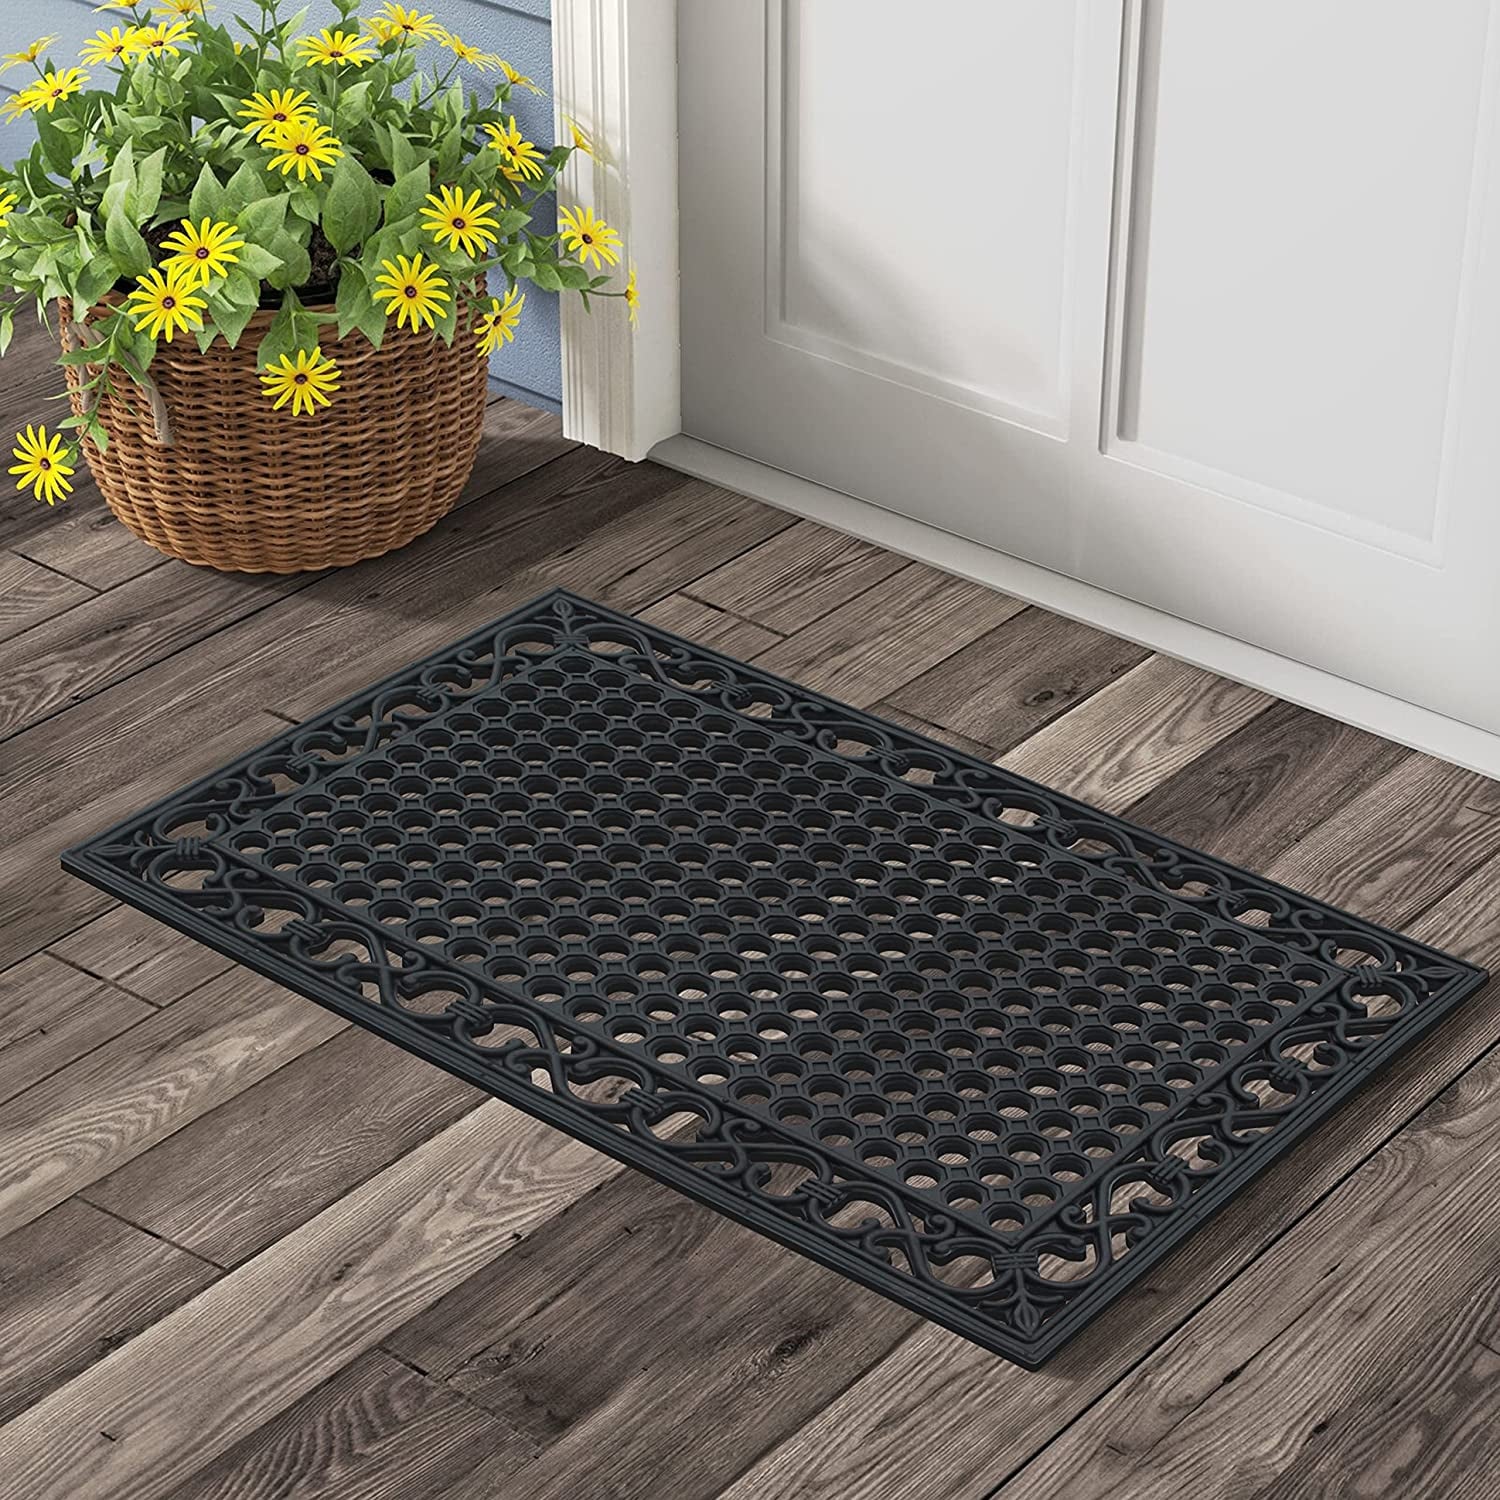 Multi-Use Patio 24 x 36 inch Winter Durable Large Heavy Duty Front Outdoor Rug Non-Slip Welcome Doormat for Entry A1 HOME COLLECTIONS A1HC Key Decorative Design Door Mat 